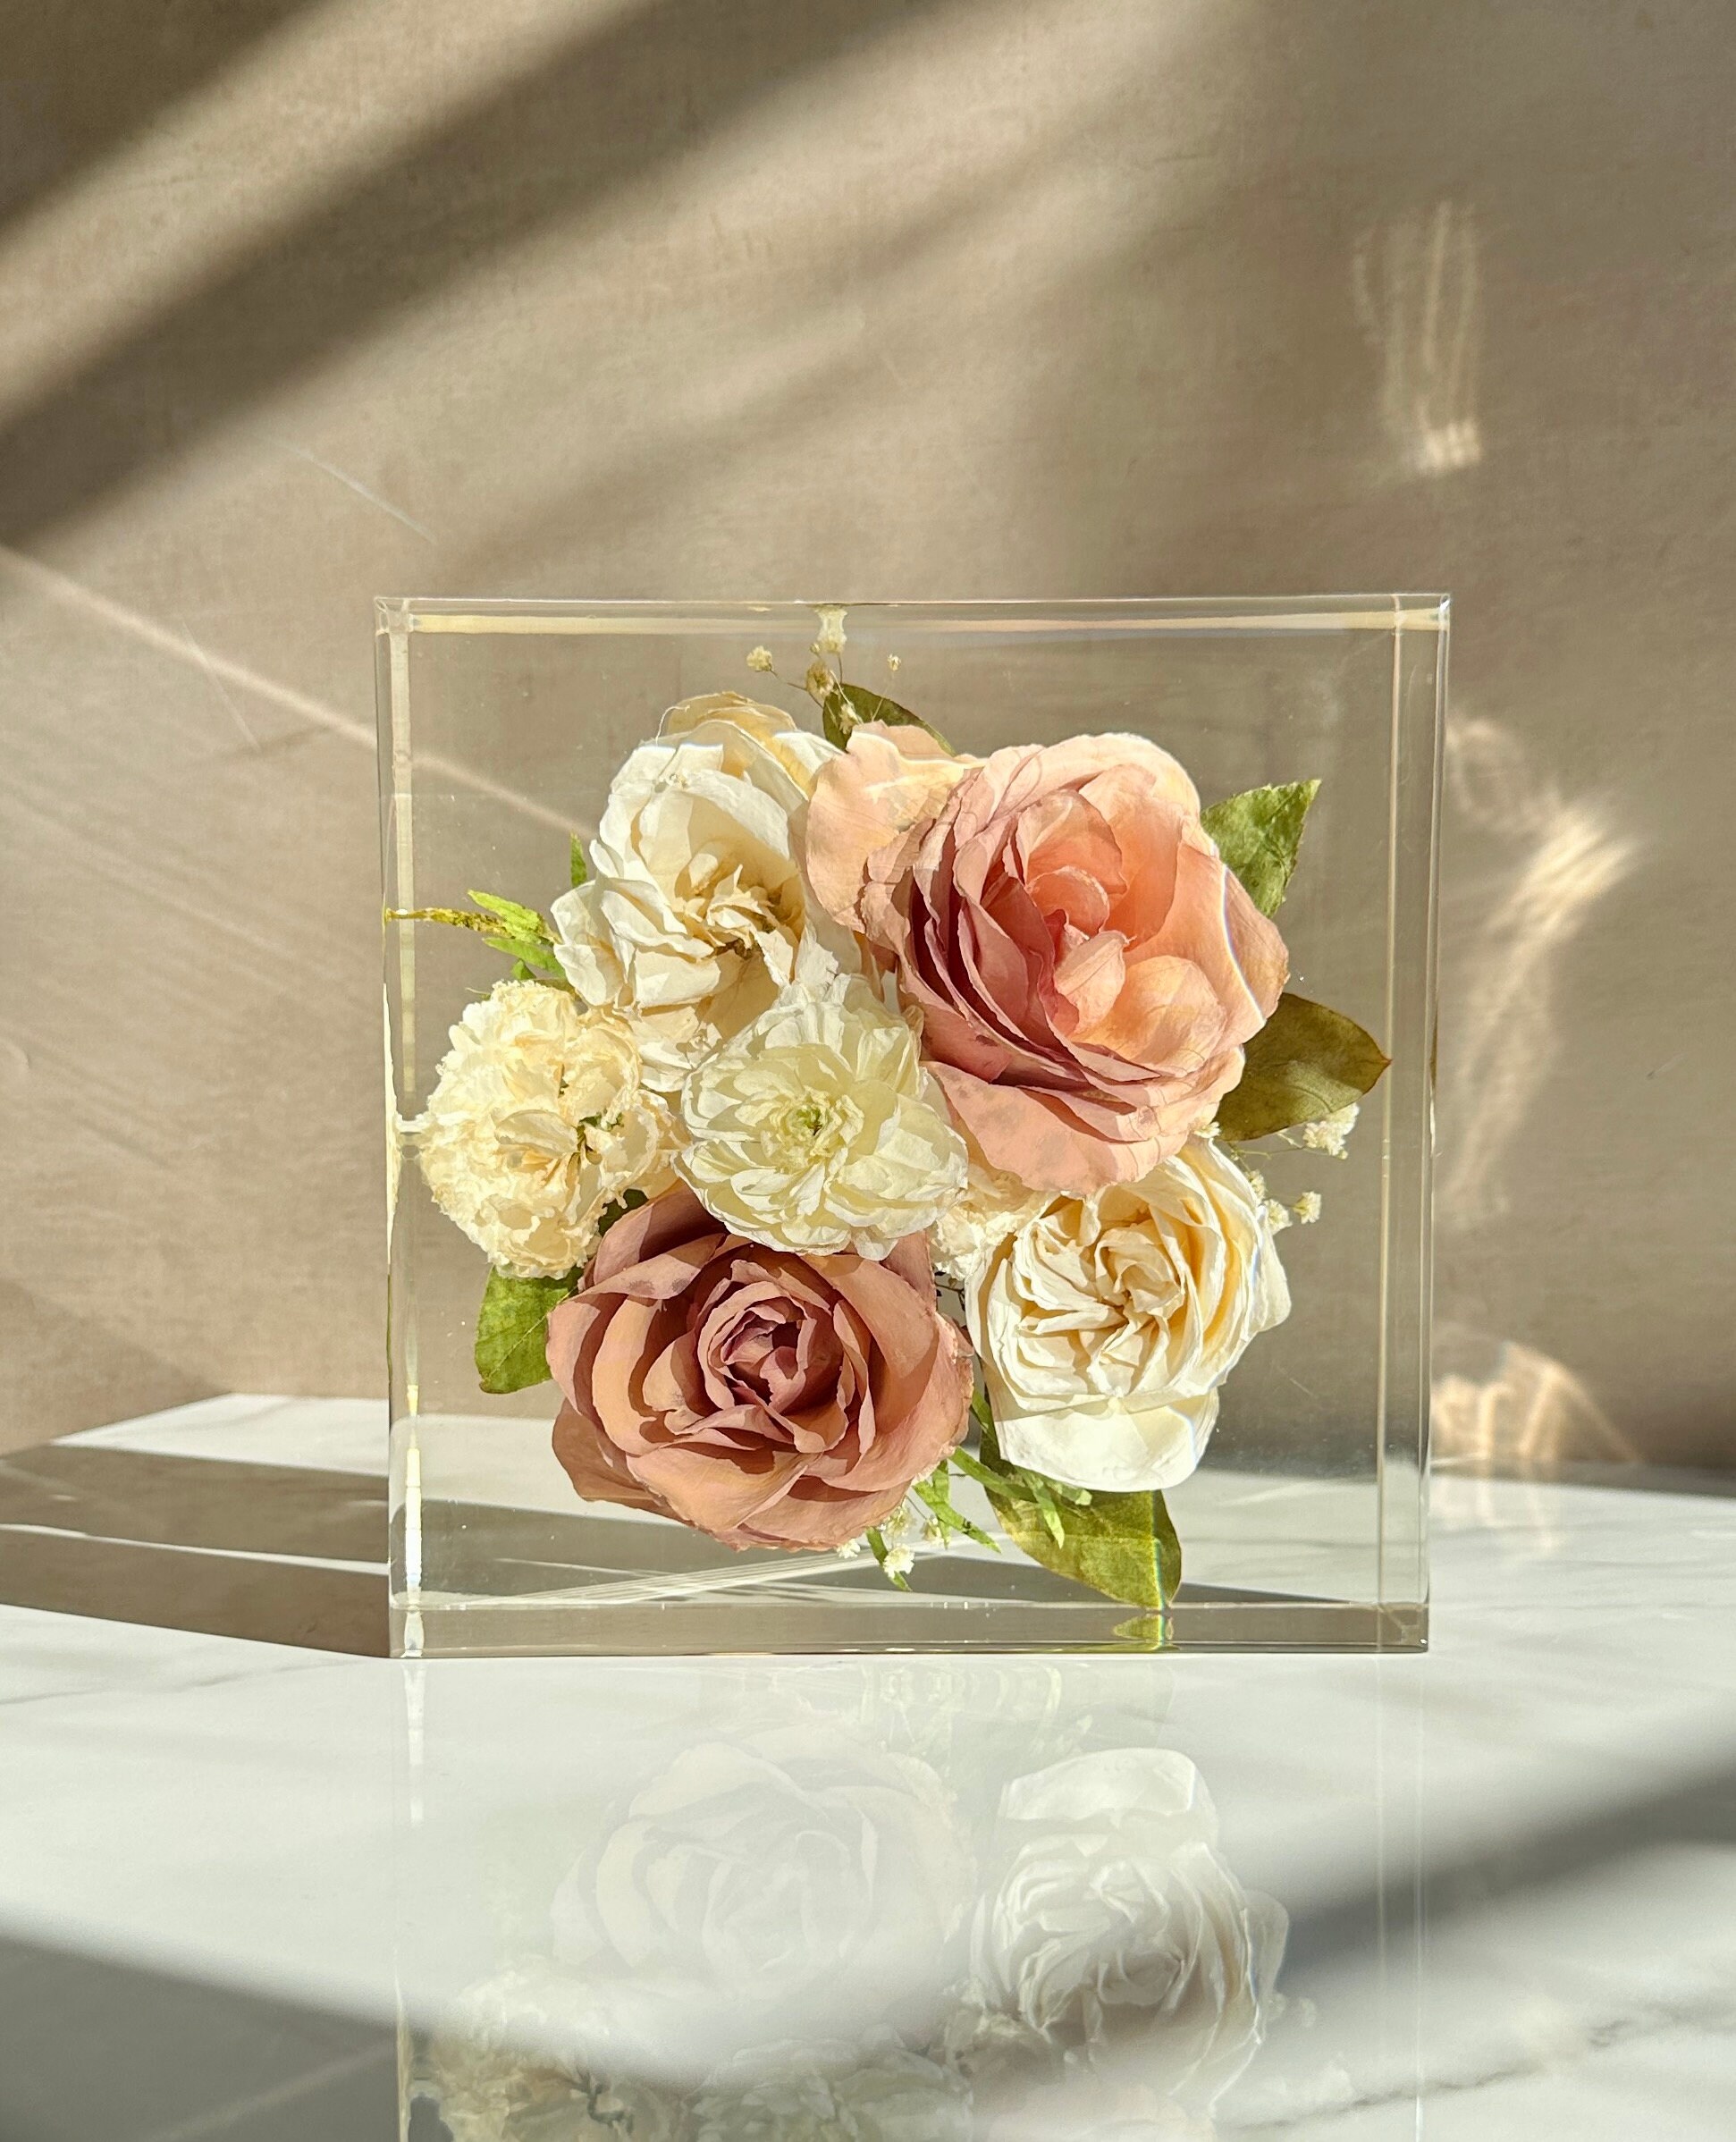 How To Preserve Flowers In Resin Like A Professional - Resin Obsession